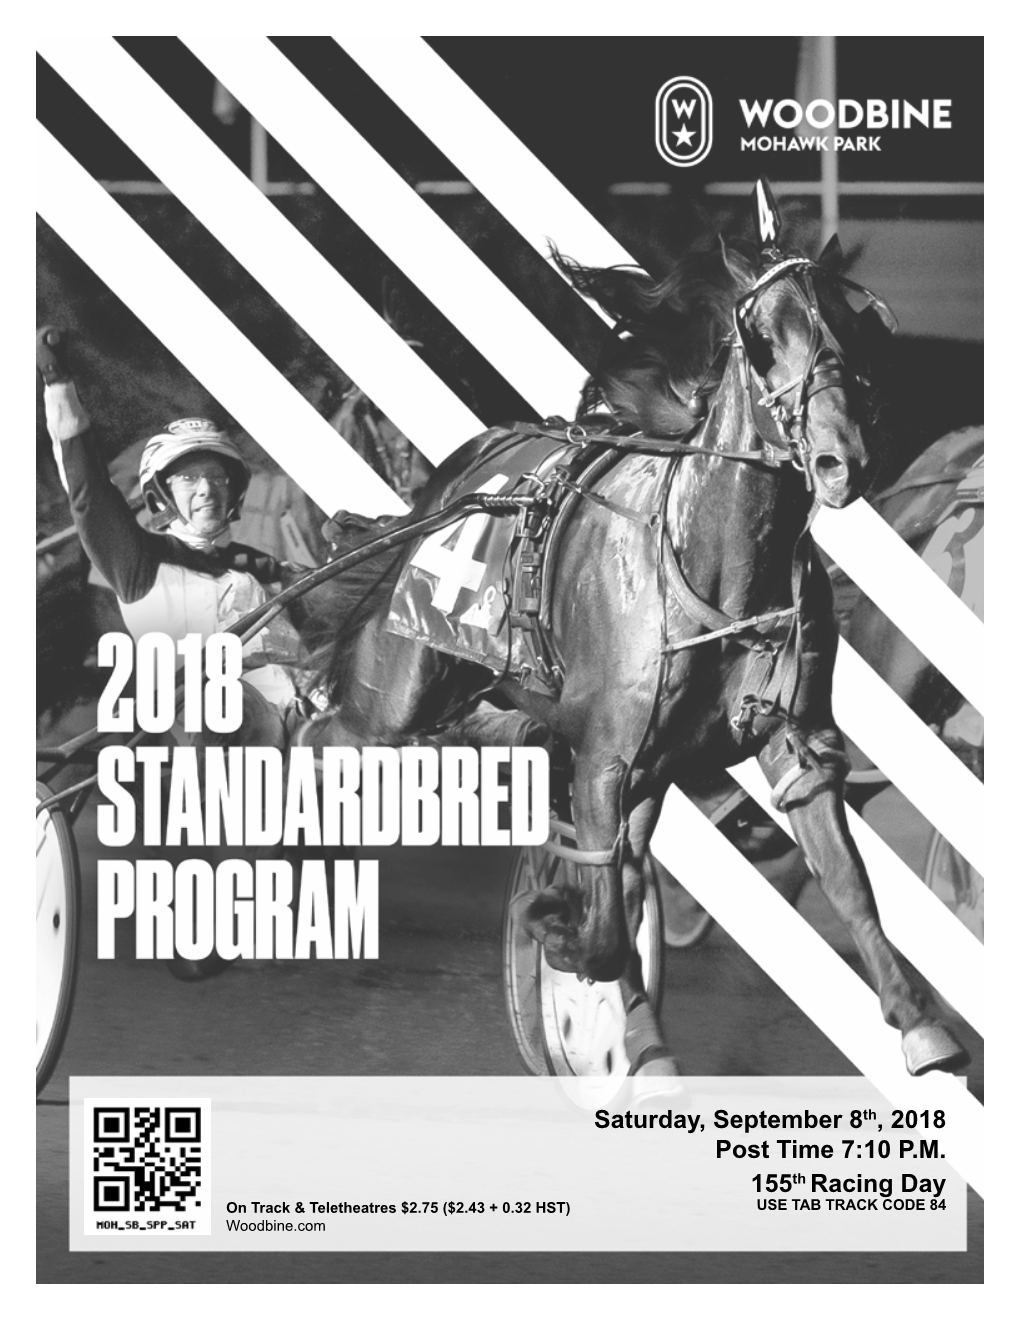 Saturday, September 8Th, 2018 Post Time 7:10 P.M. 155Th Racing Day on Track & Teletheatres $2.75 ($2.43 + 0.32 HST) USE TAB TRACK CODE 84 Woodbine.Com